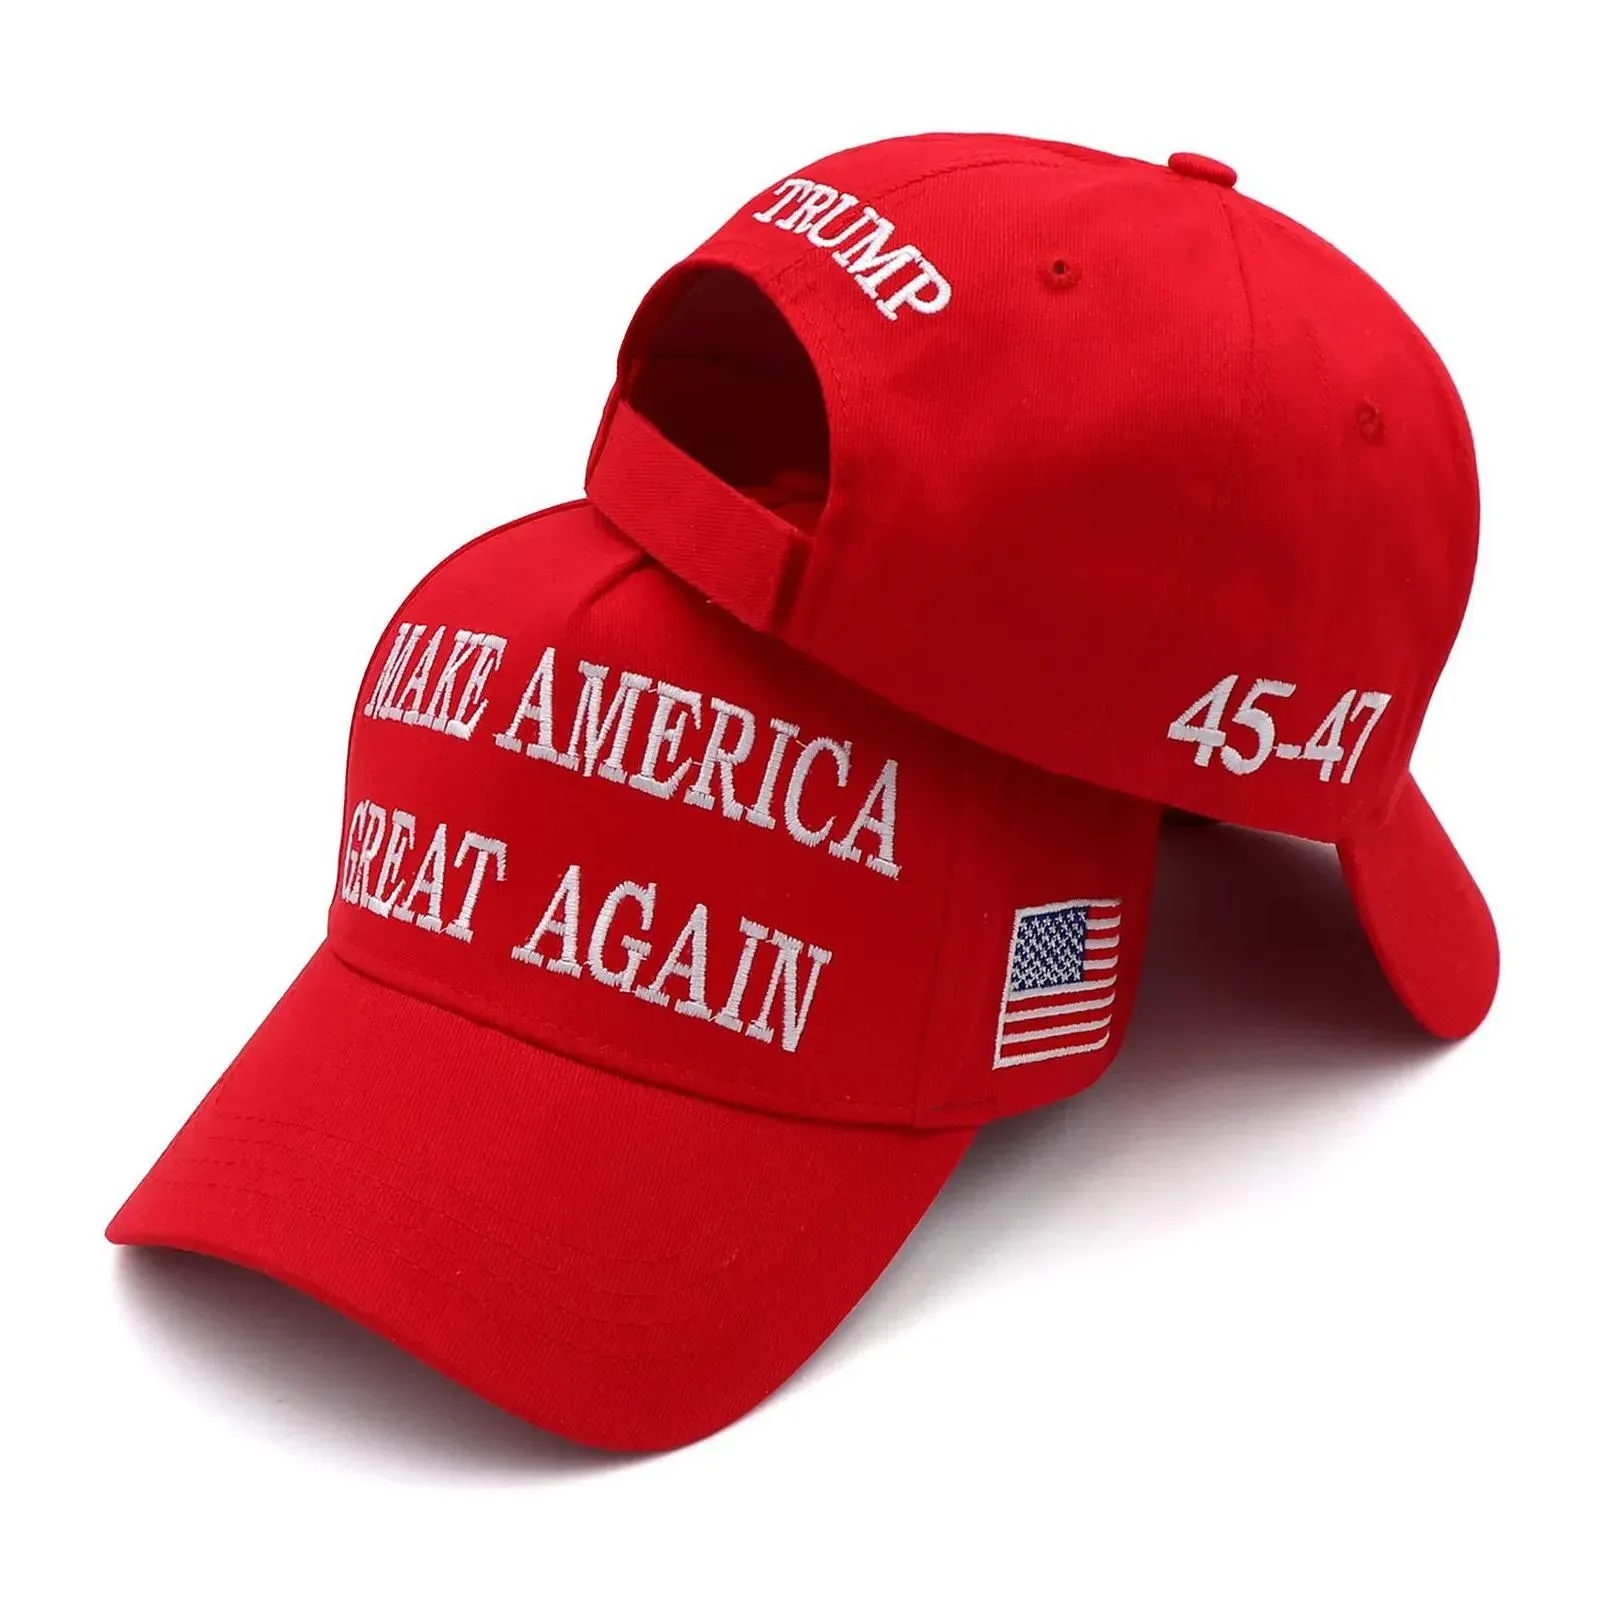 trump activity party hats cotton embroidery basebal trump 45-47 make america great again sports hat wholesale